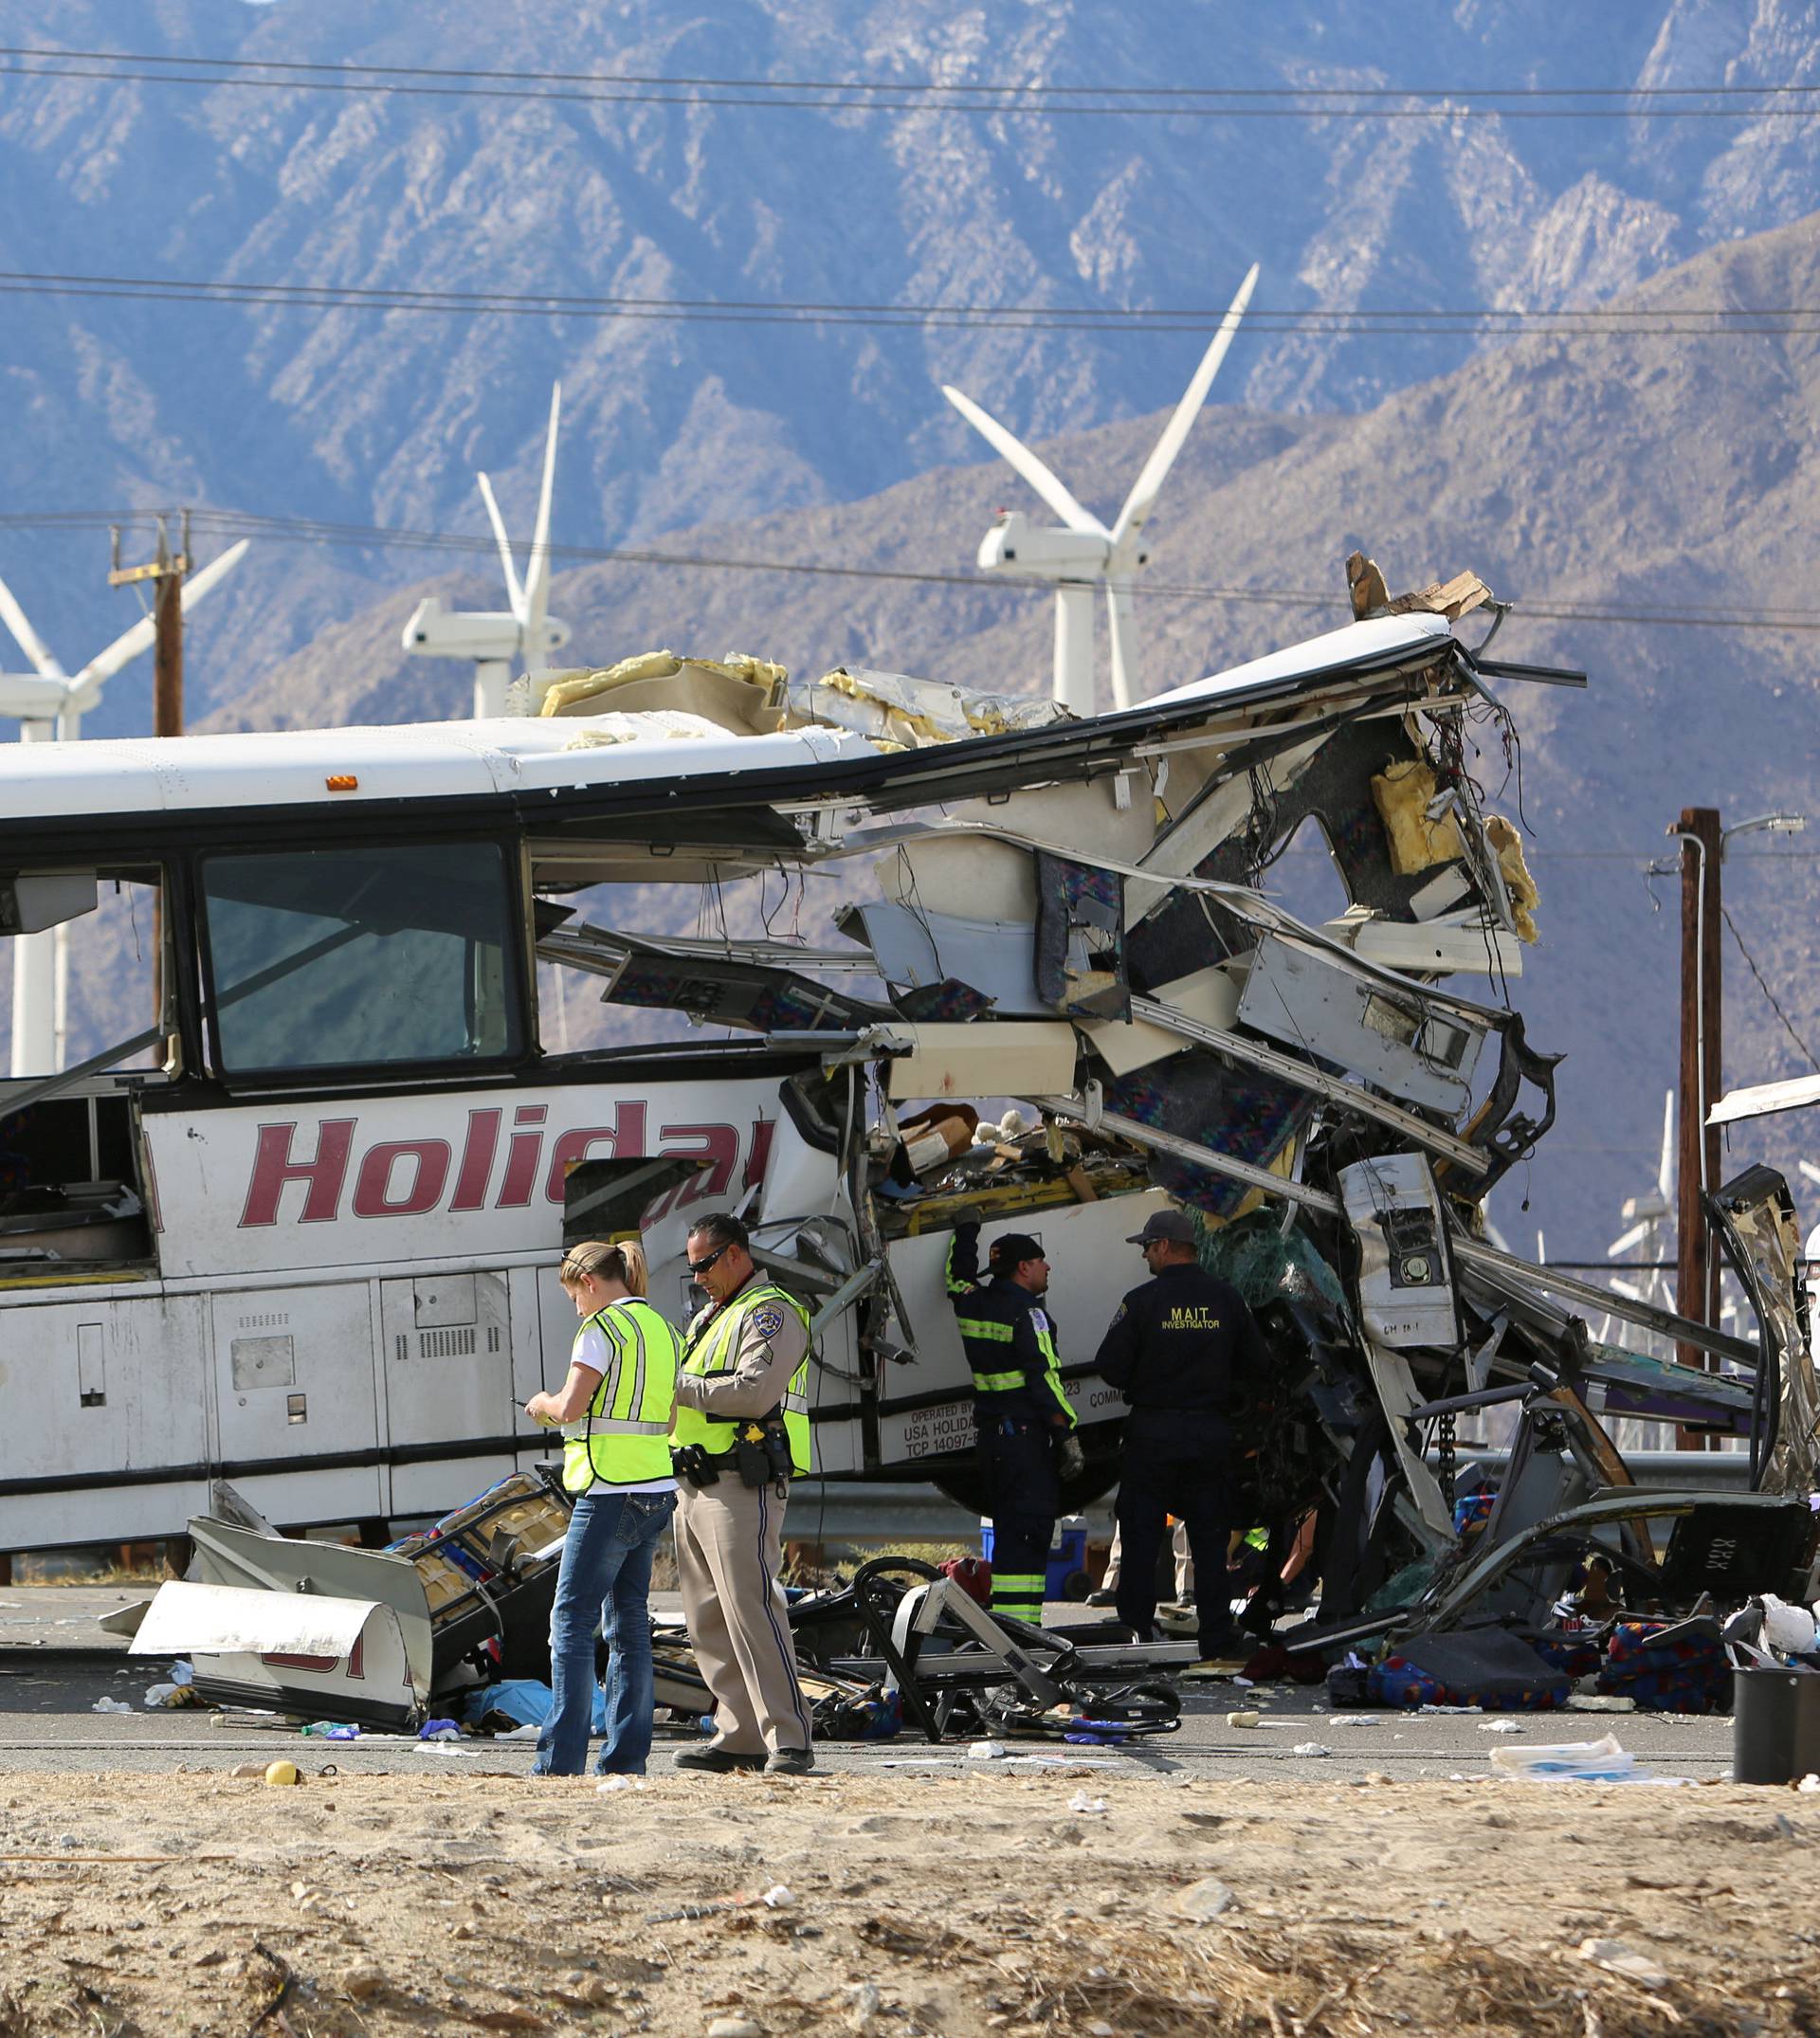 Investigators confer at the scene of a mass casualty bus crash on the westbound Interstate 10 freeway near Palm Springs, California